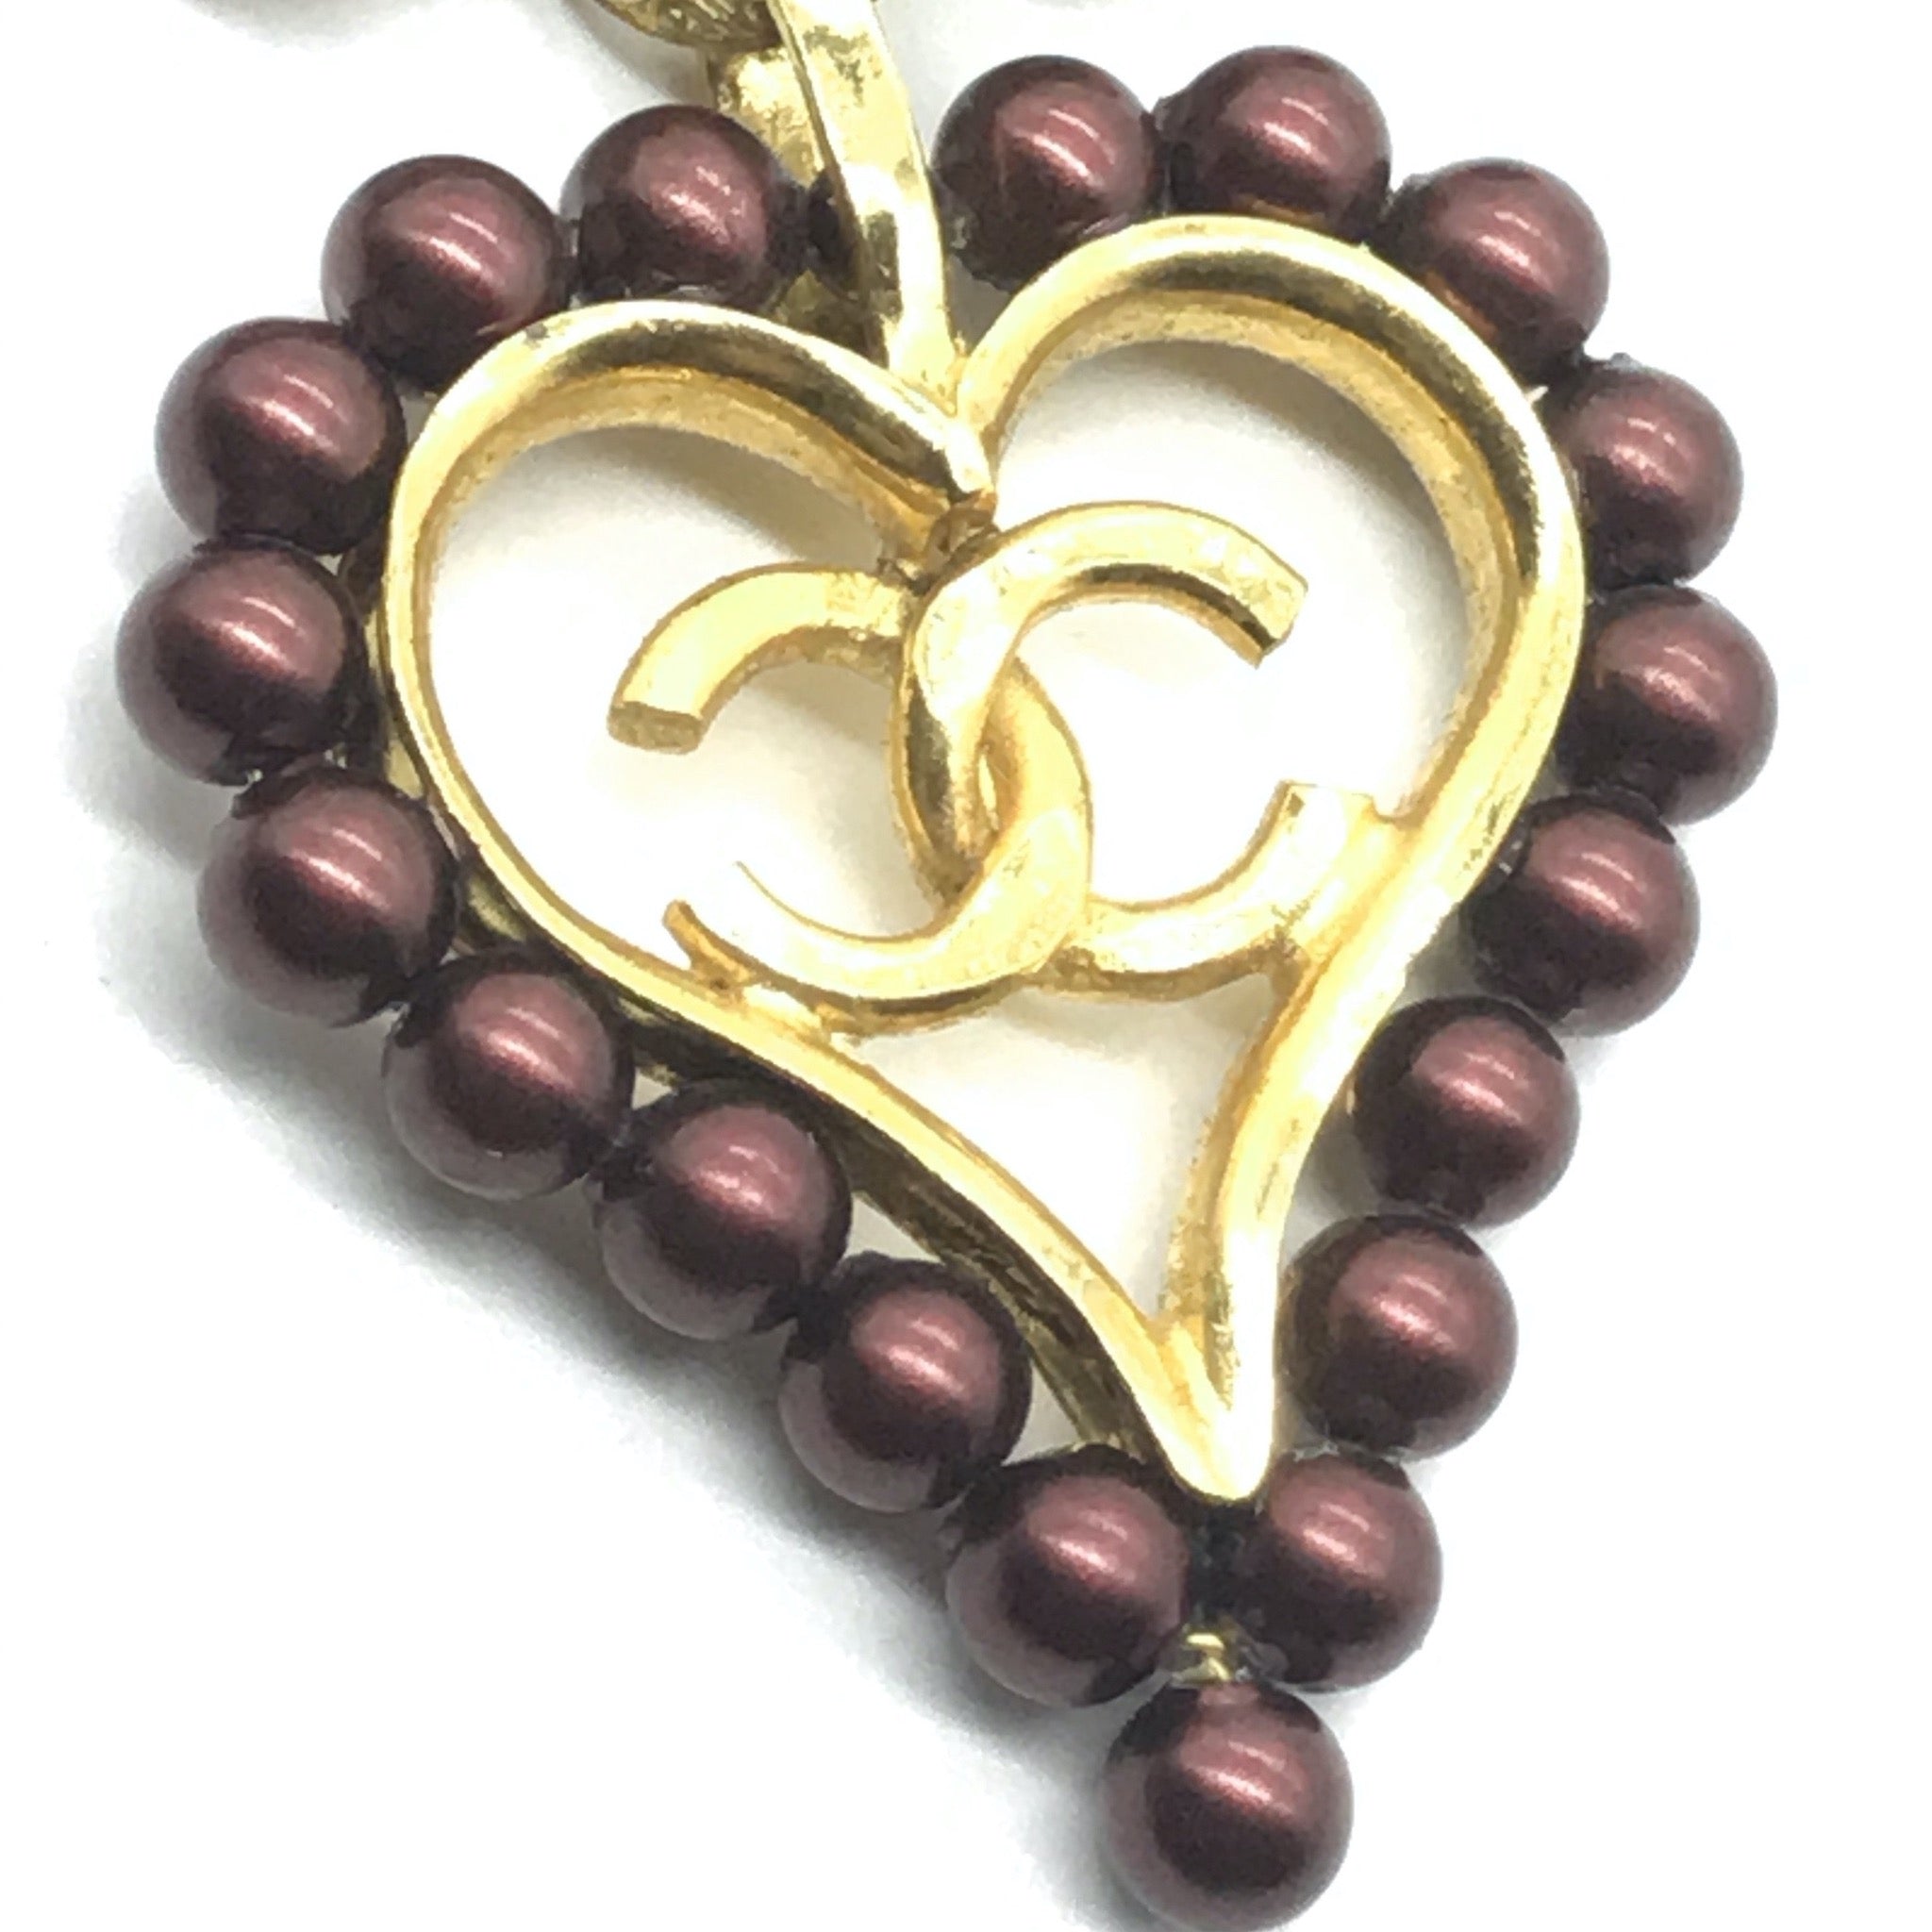 Chanel Necklace with Pearl Heart - VeryVintage – Very Vintage